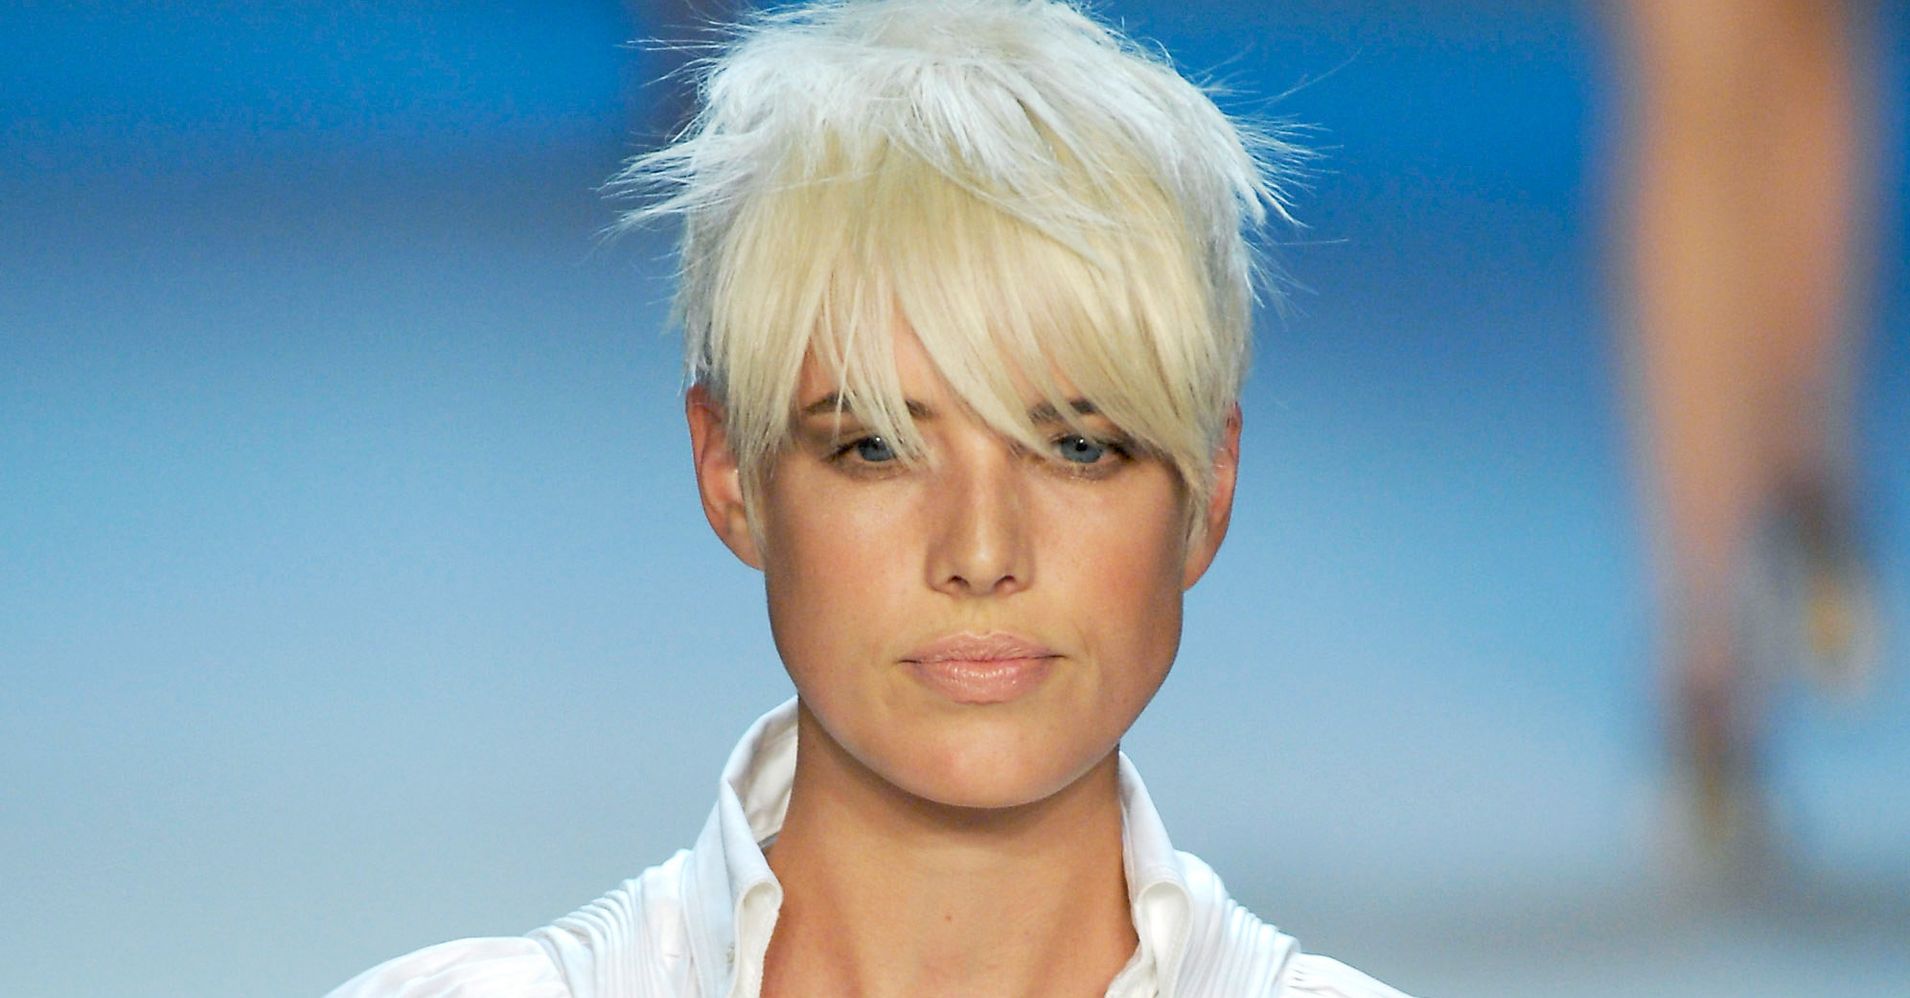 15 Photos That Will Make You Reconsider A Bowl Haircut Really Huffpost